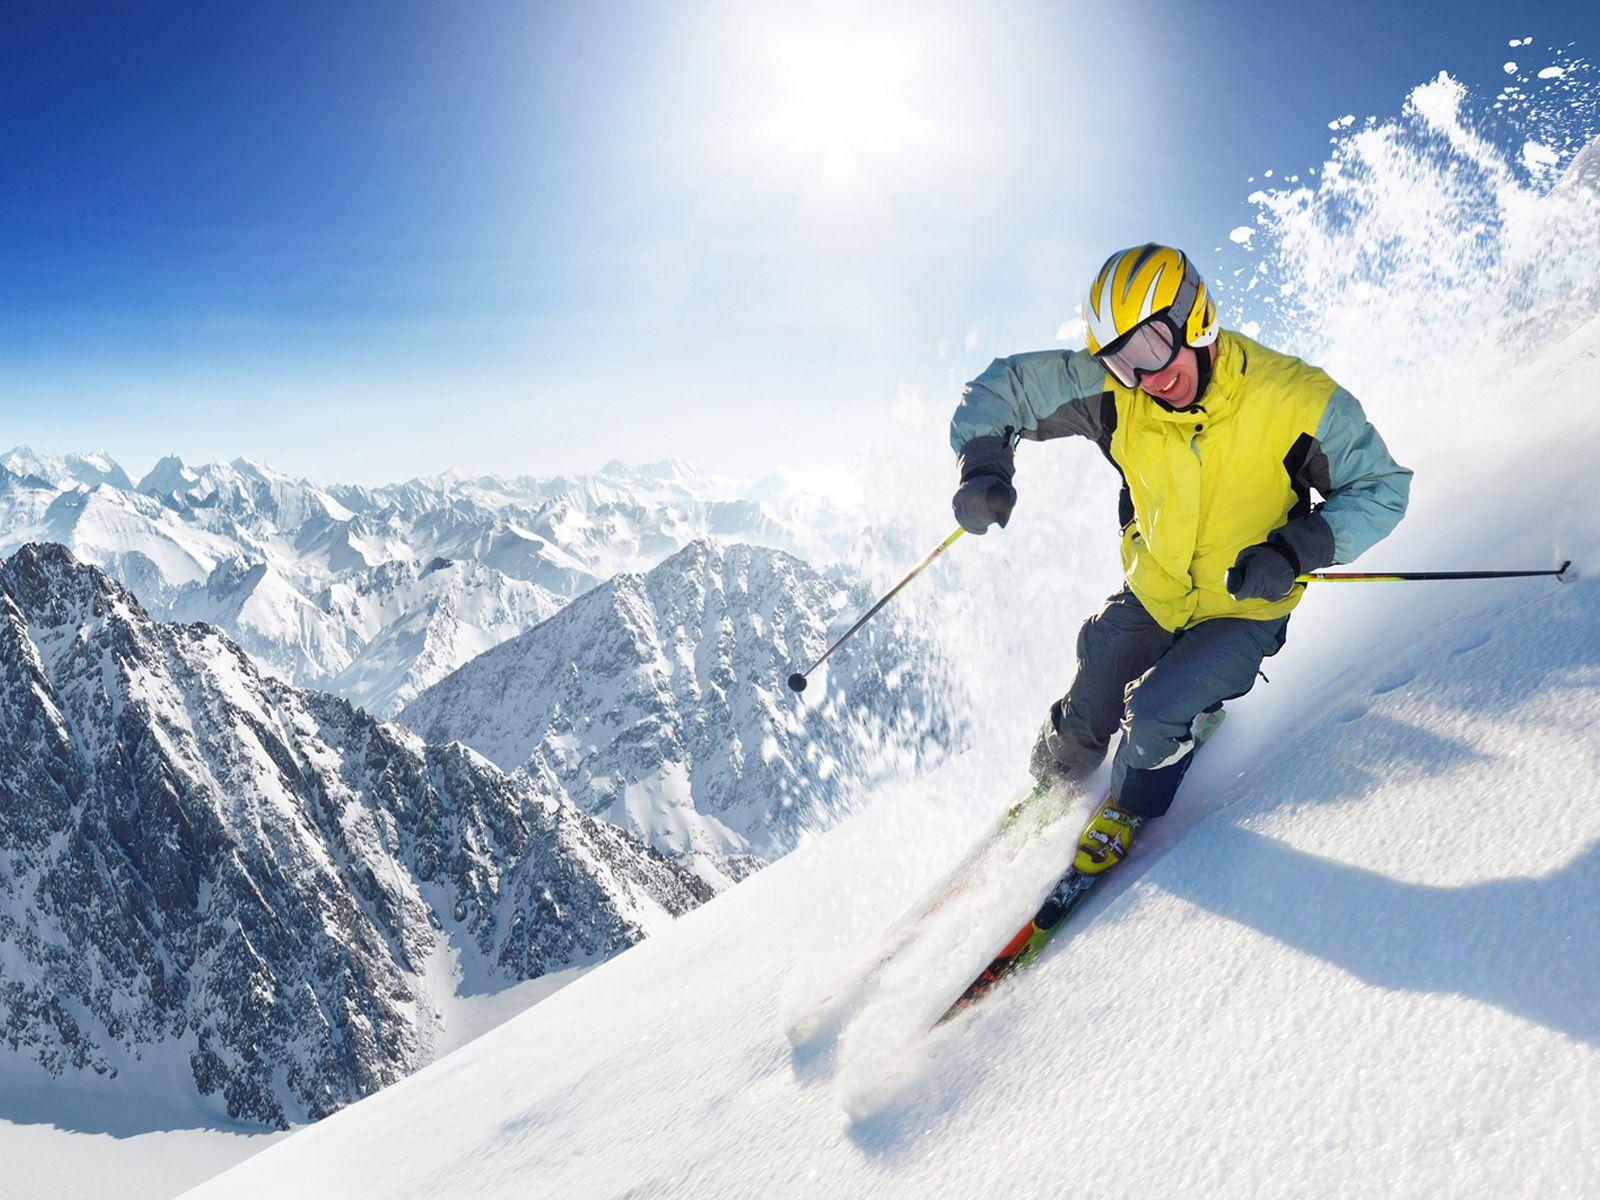 Skiing Wallpapers Top Free Skiing Backgrounds Wallpaperaccess 8672